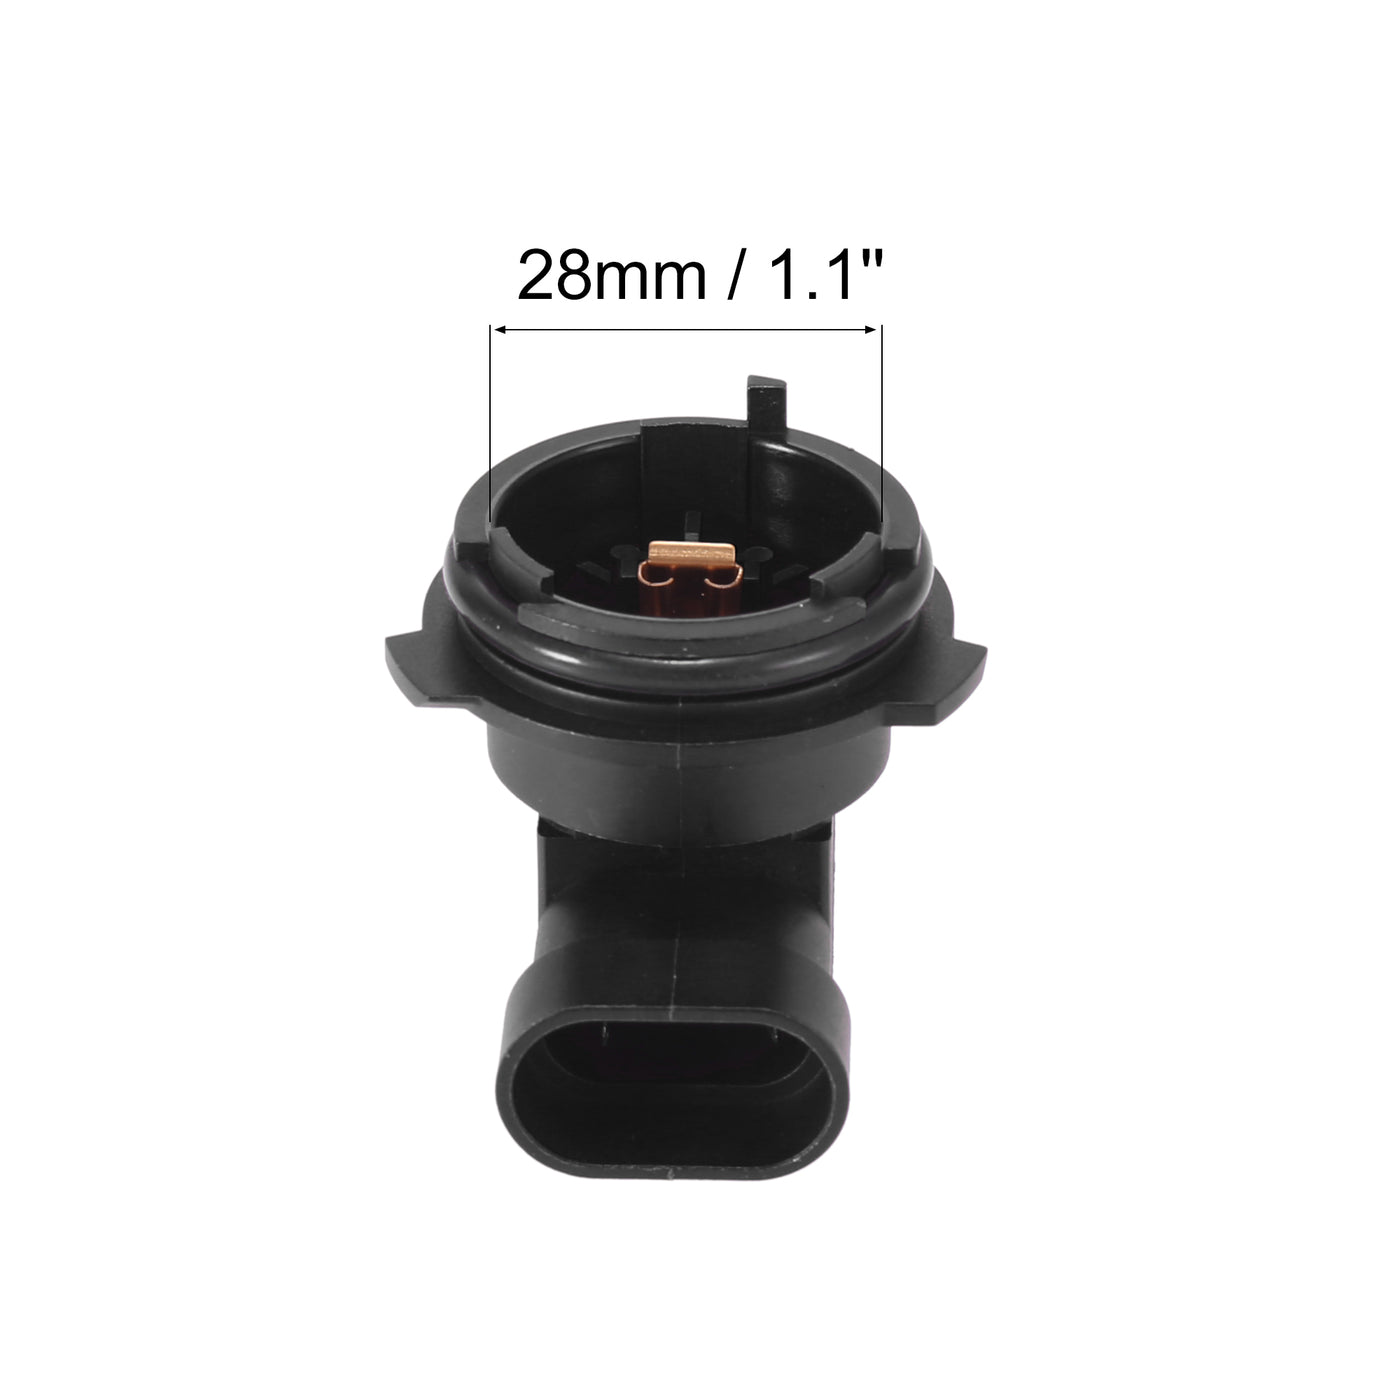 X AUTOHAUX Headlight Socket H7 Lamp Bulb Holder Base 1226084 9118046 for Opel for Astra G Zafira a